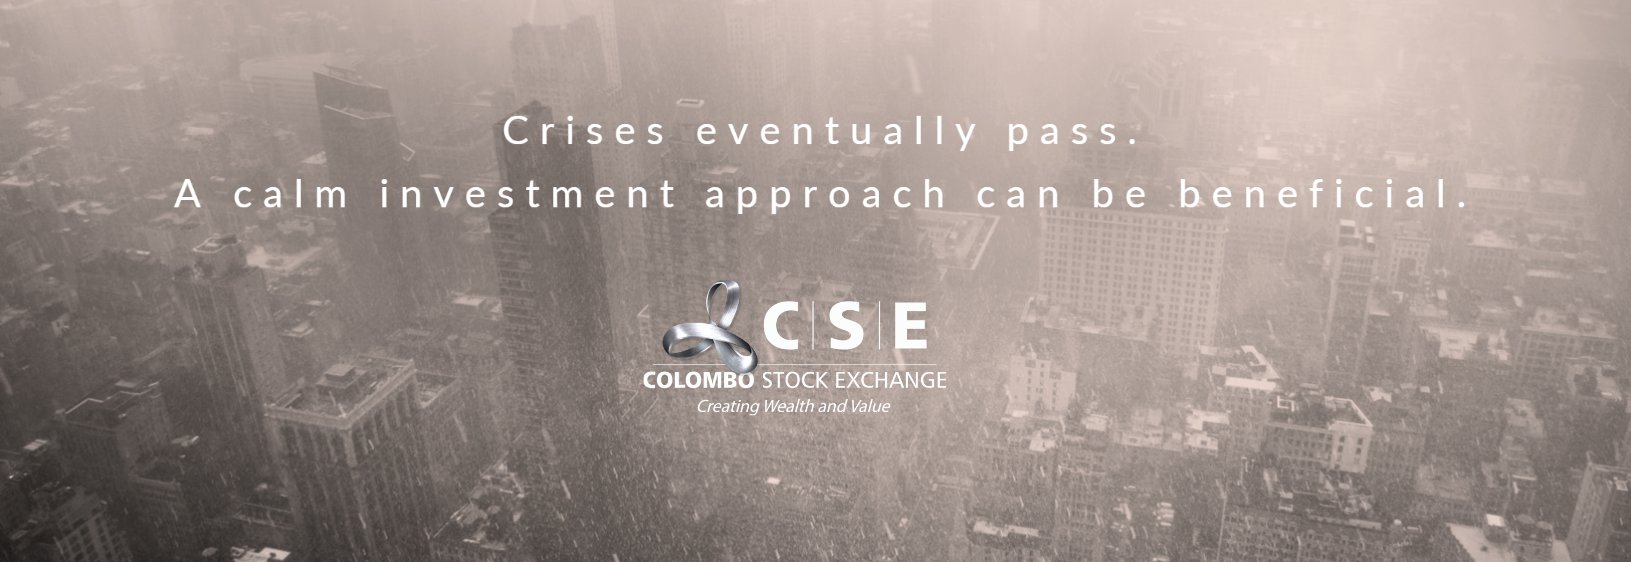 Trading at CSE halted for 30 minutes